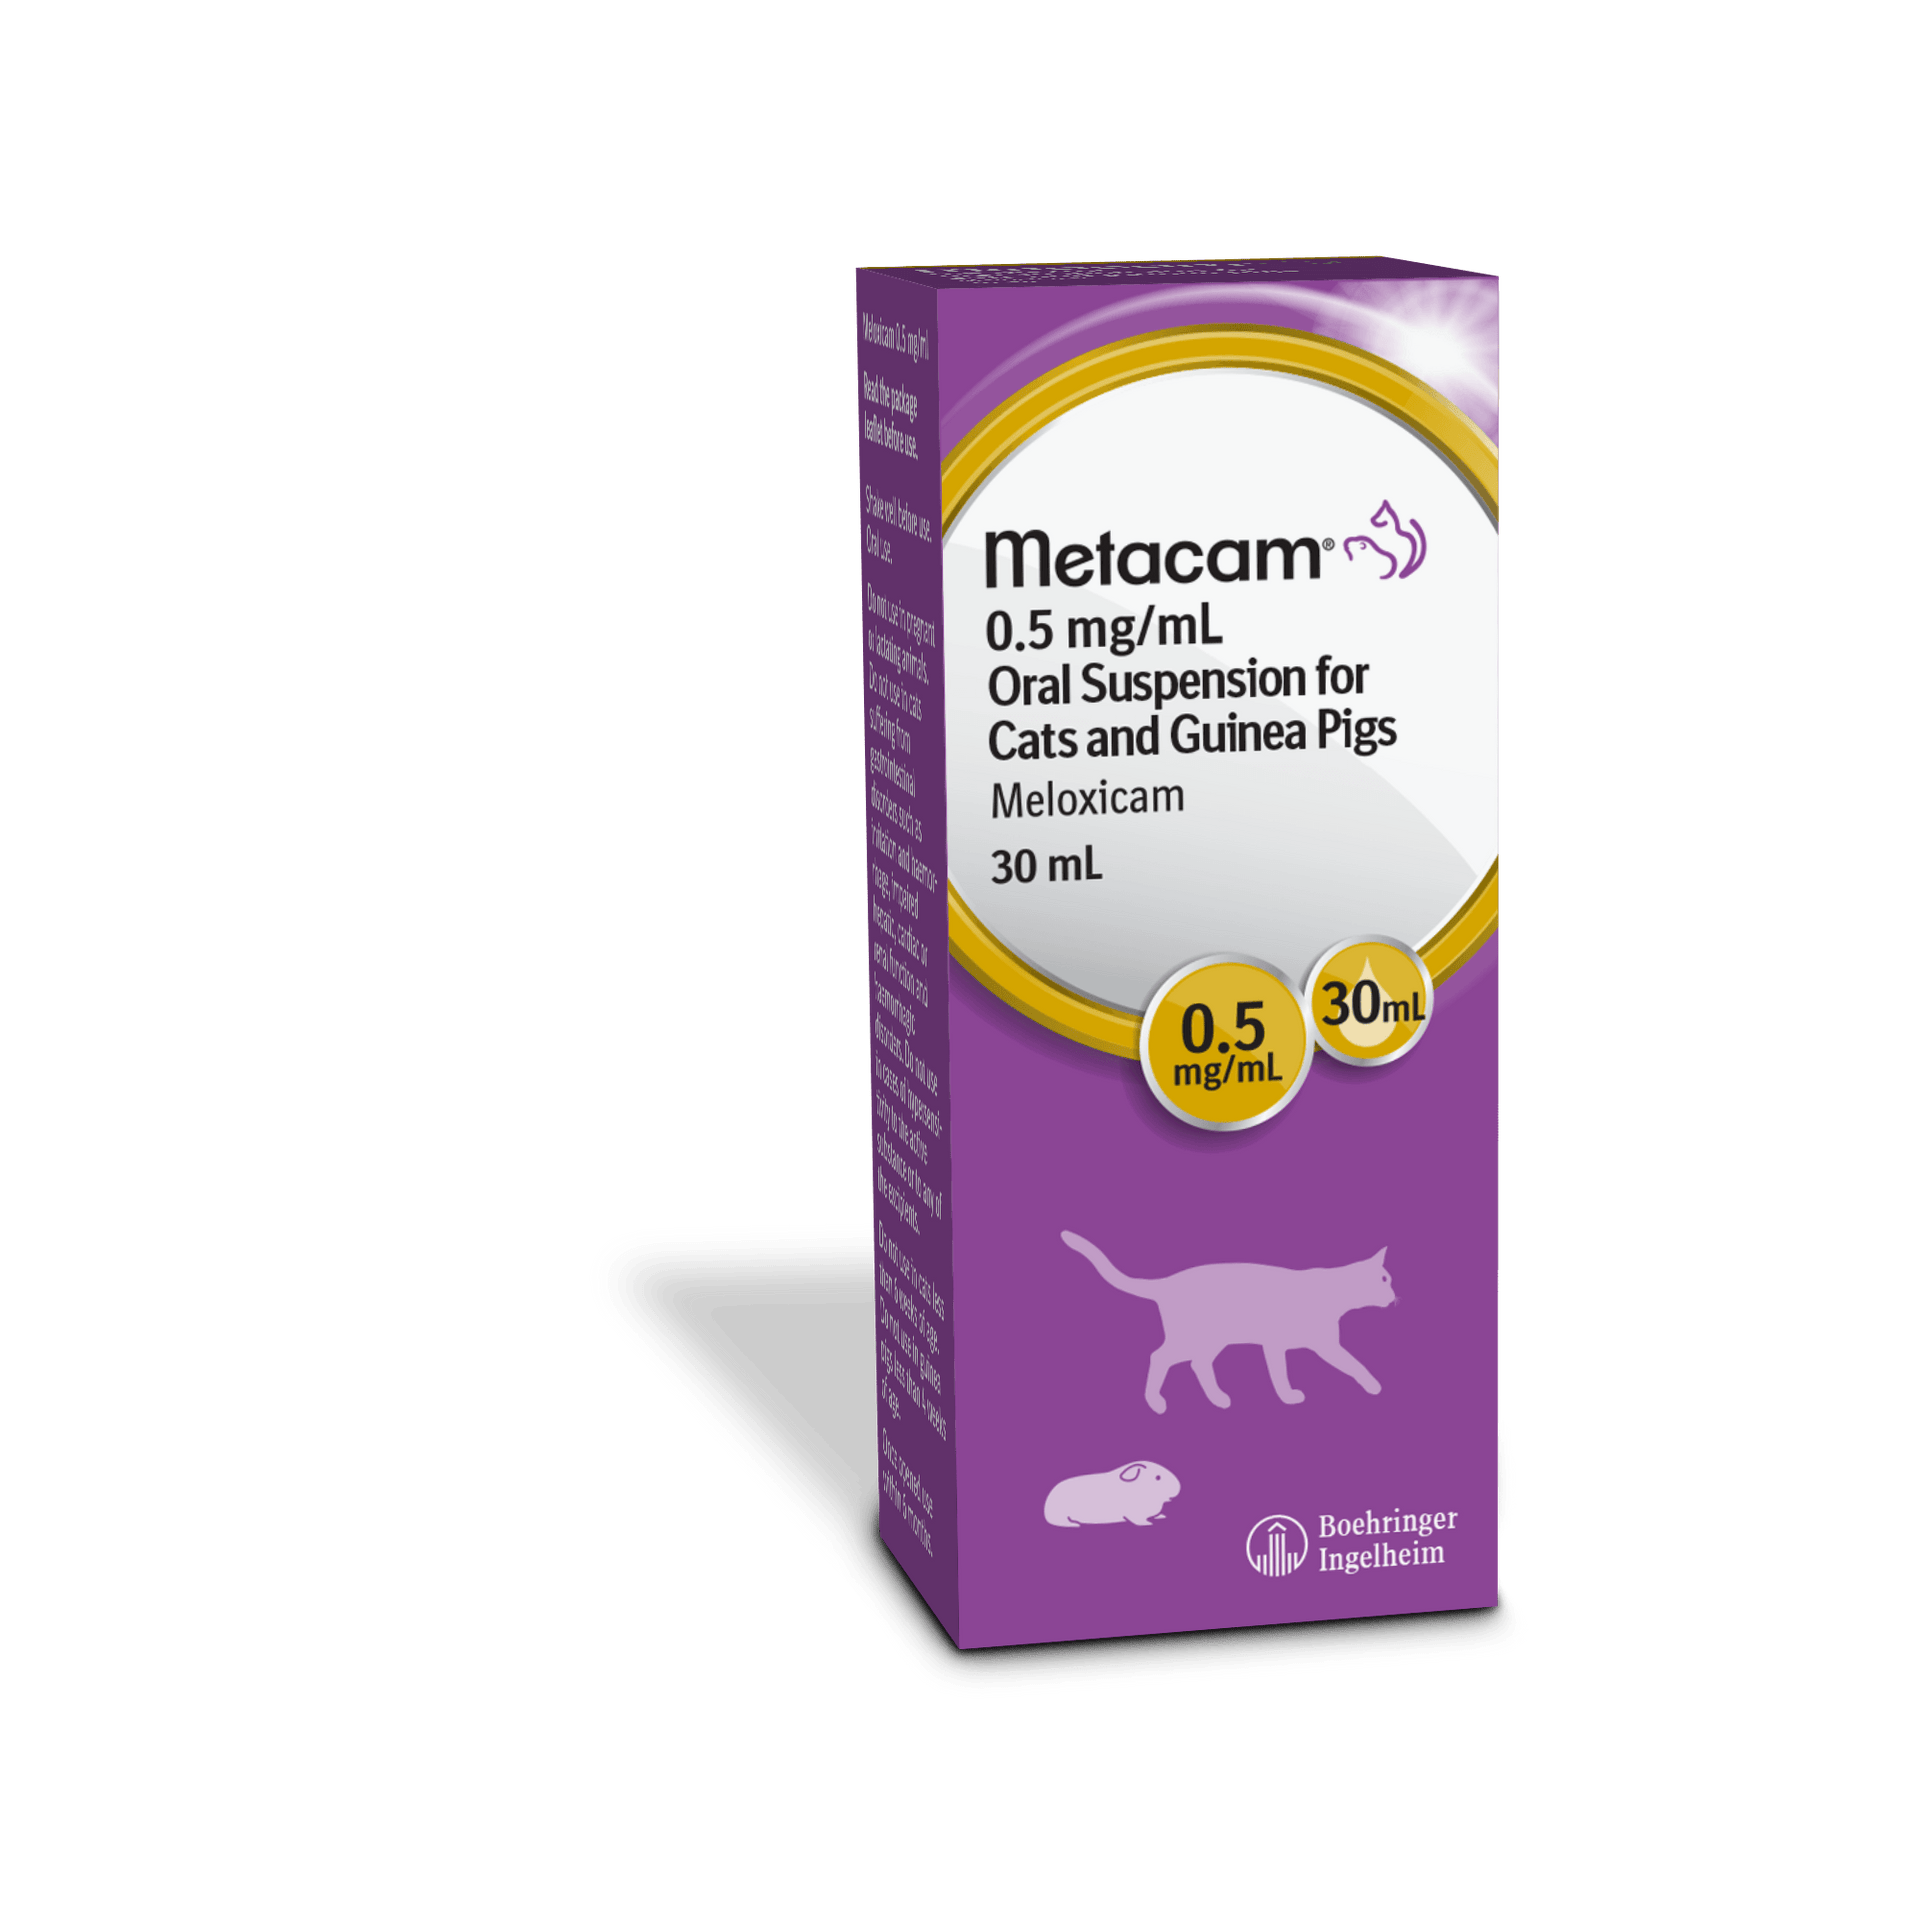 Metacam 0.5mg/mL Oral Suspension for Cats and Guinea Pigs 30ml